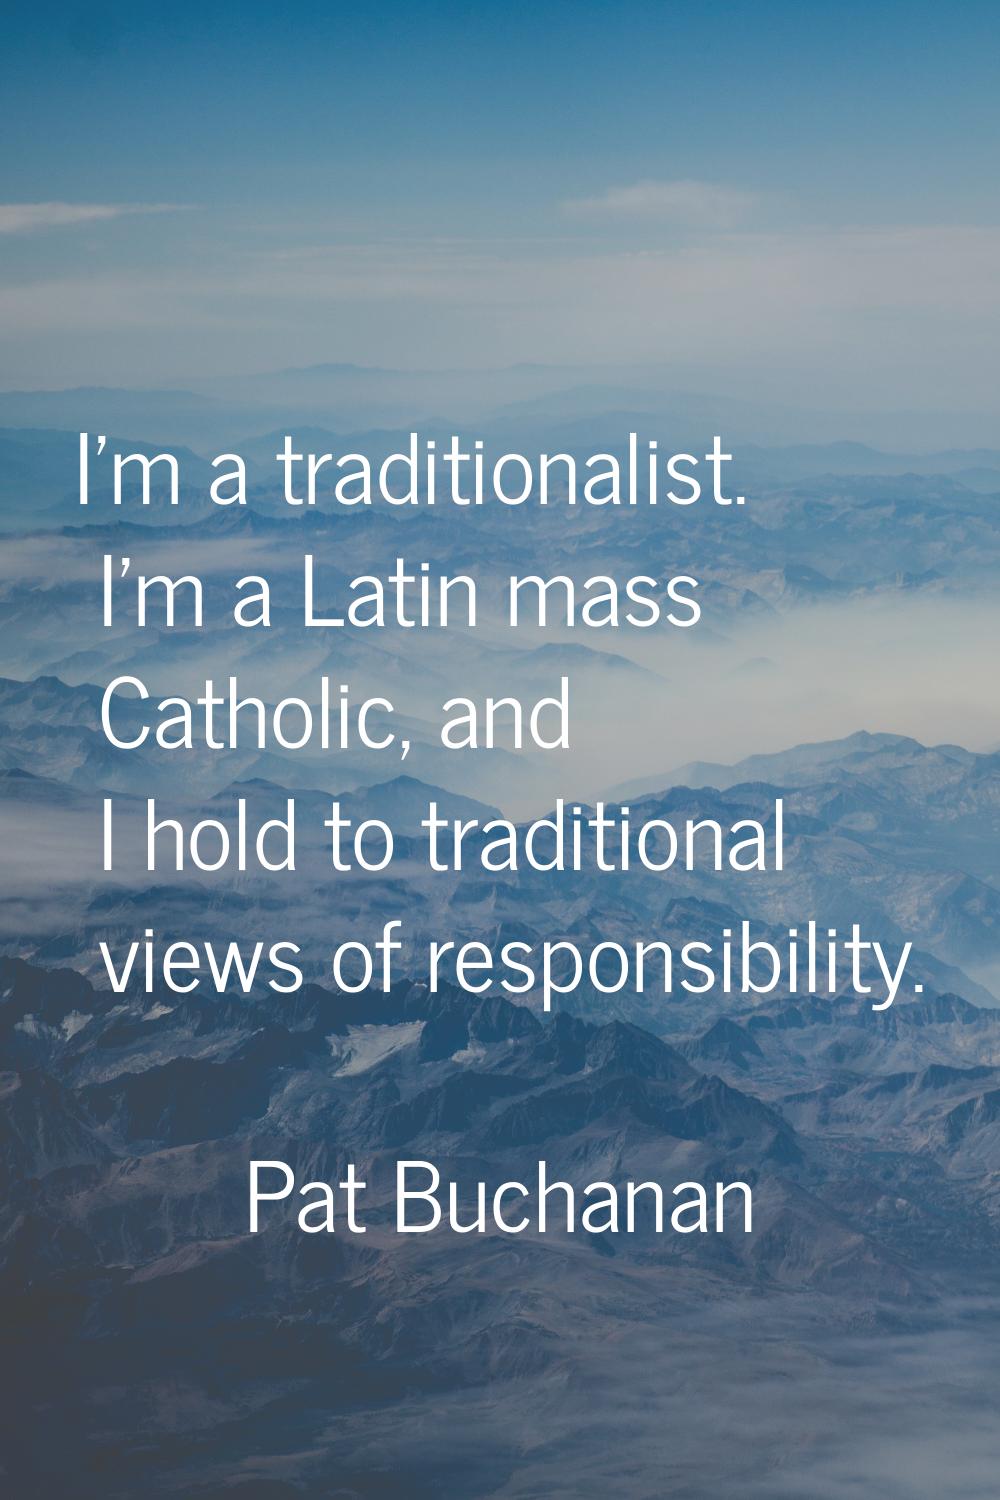 I'm a traditionalist. I'm a Latin mass Catholic, and I hold to traditional views of responsibility.